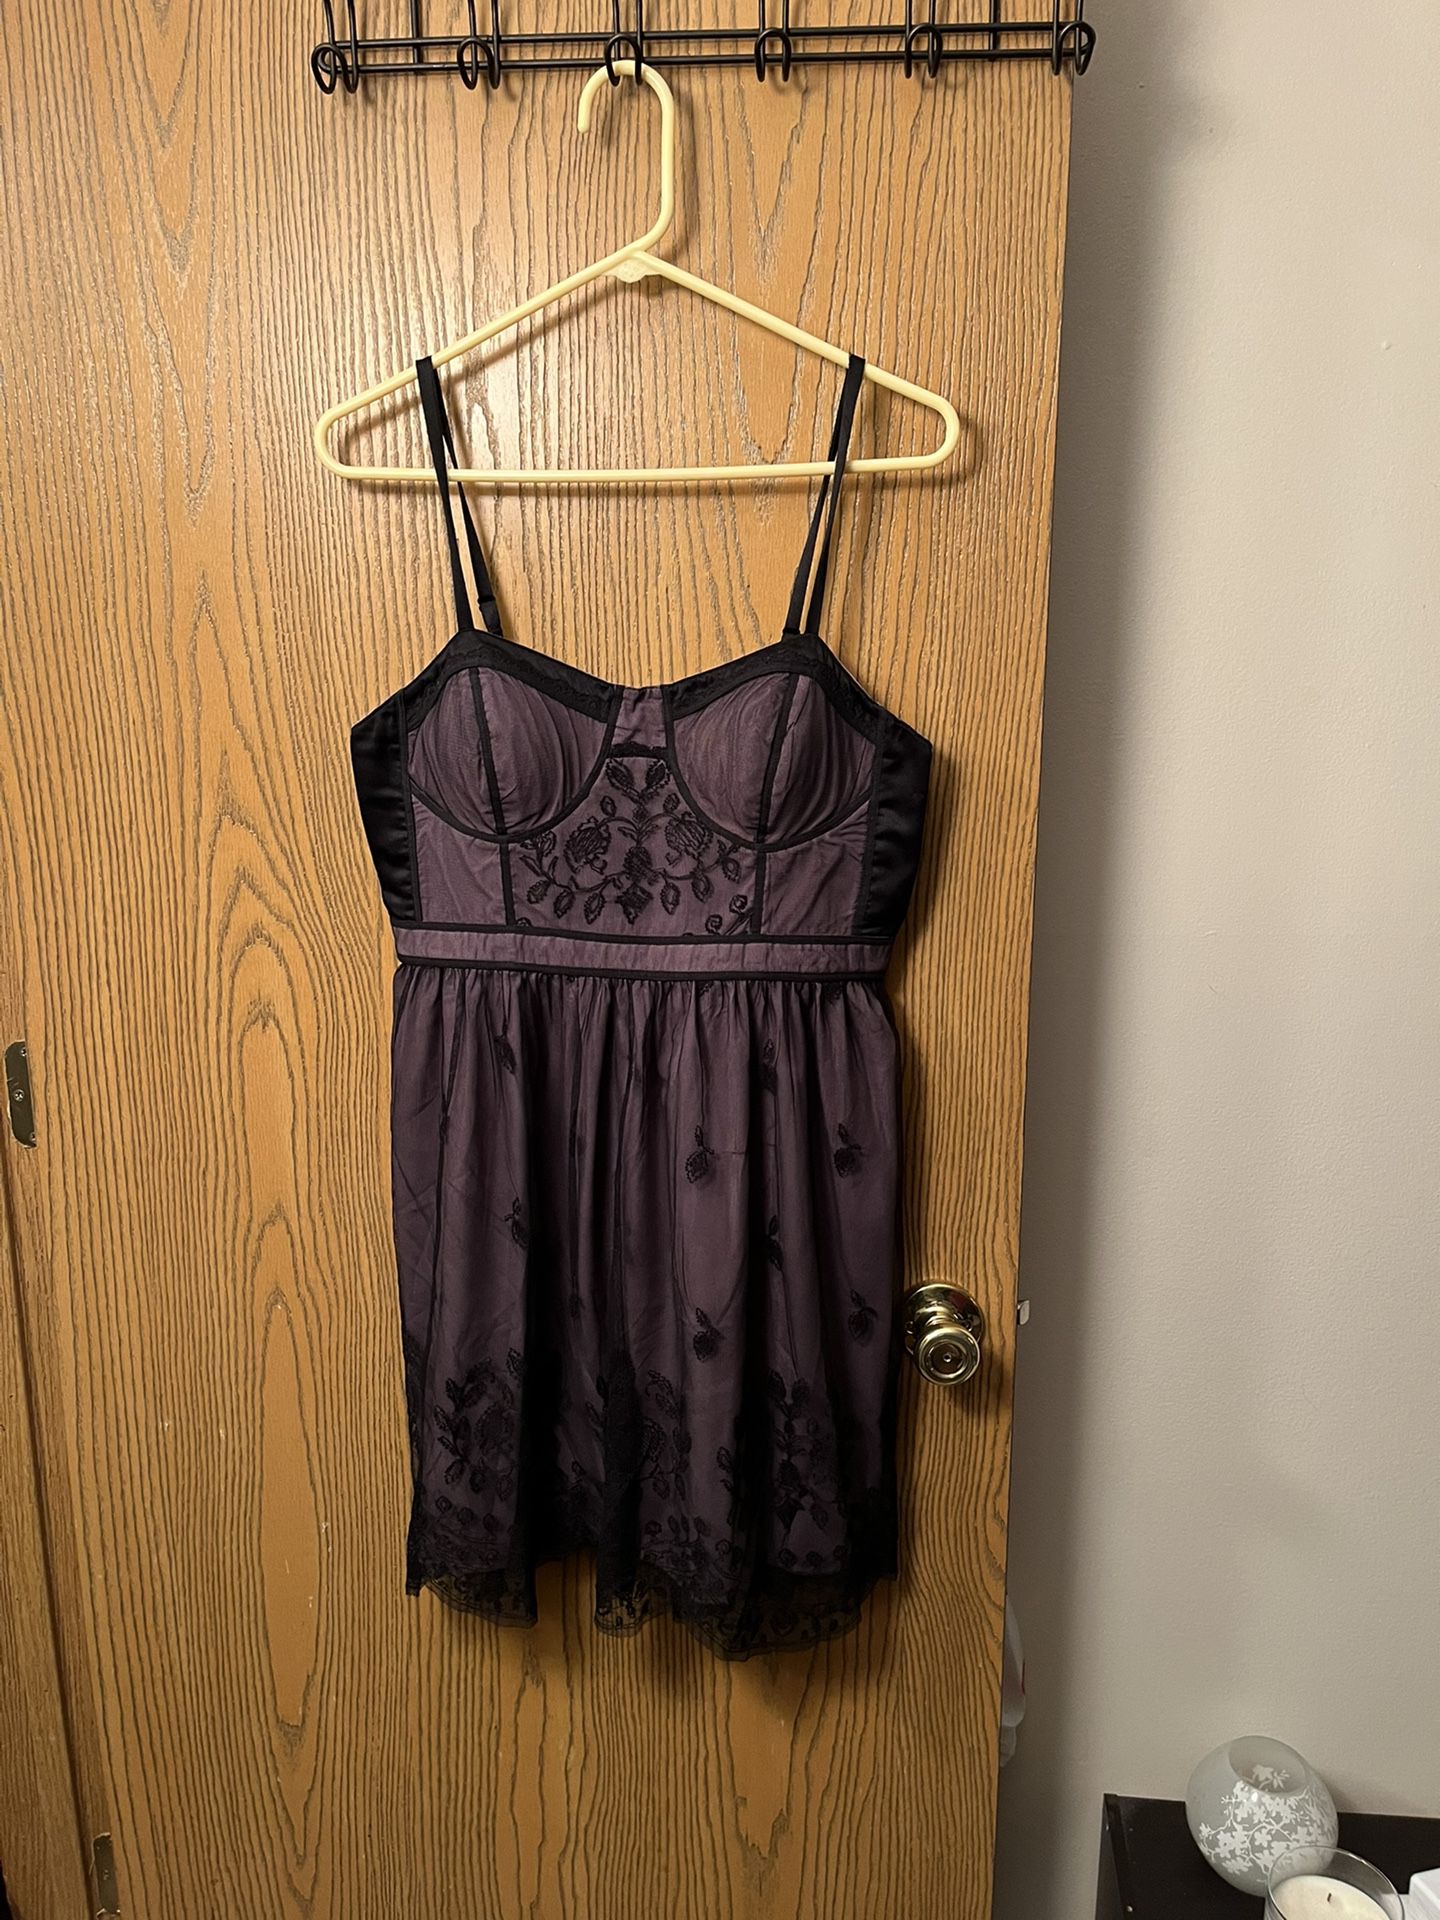 AE bustier Style Dress 